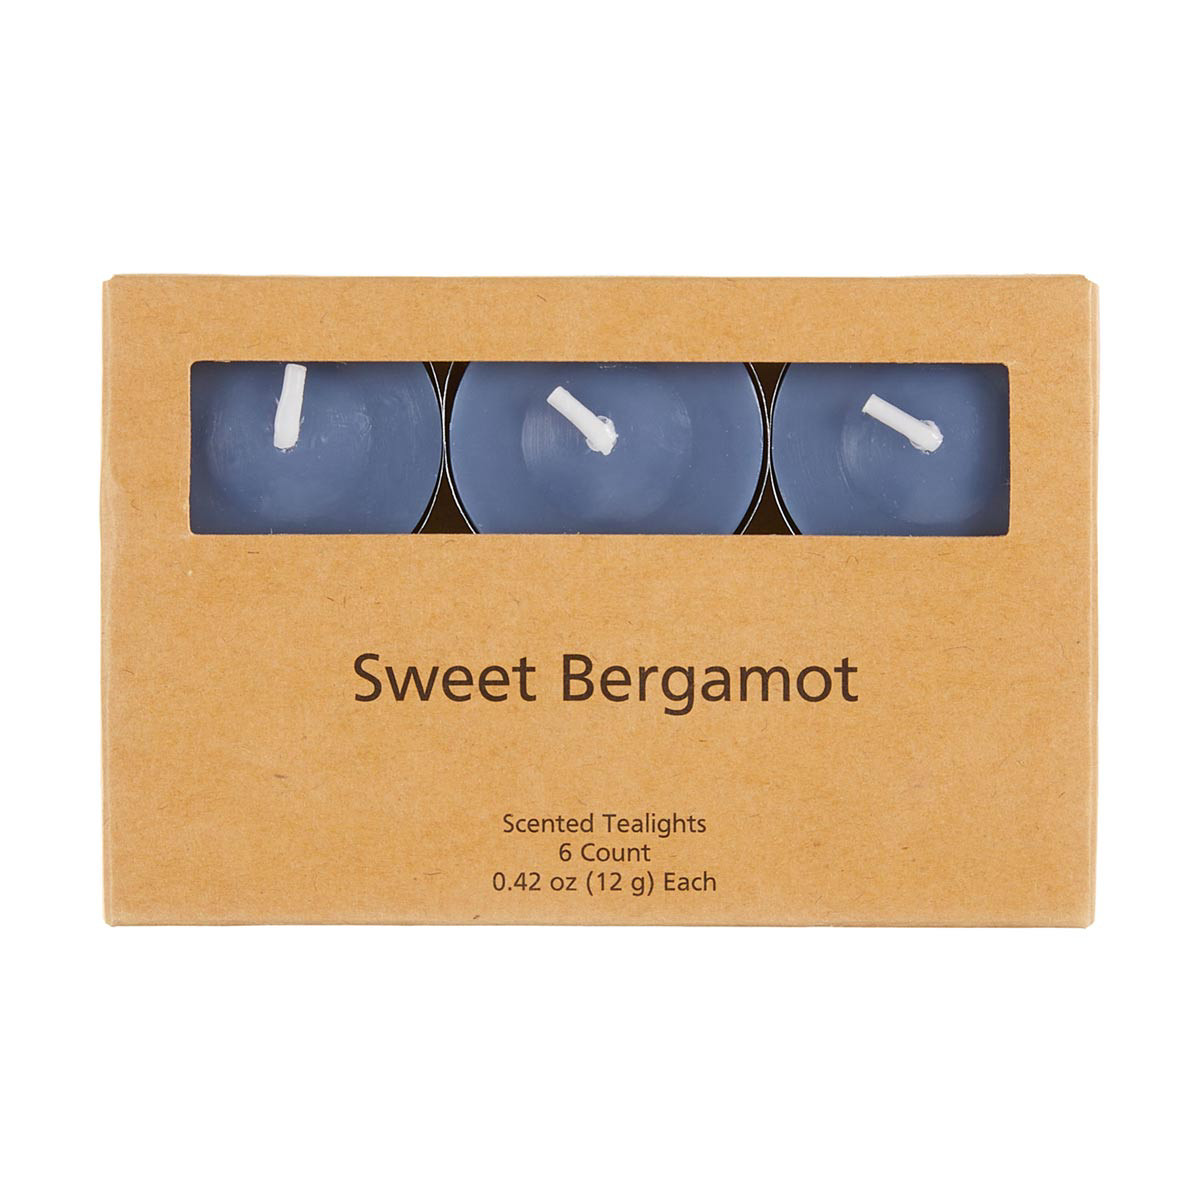 Scented Sweet Bergamot Tealight Candles, 0.42 oz each - 6 ct